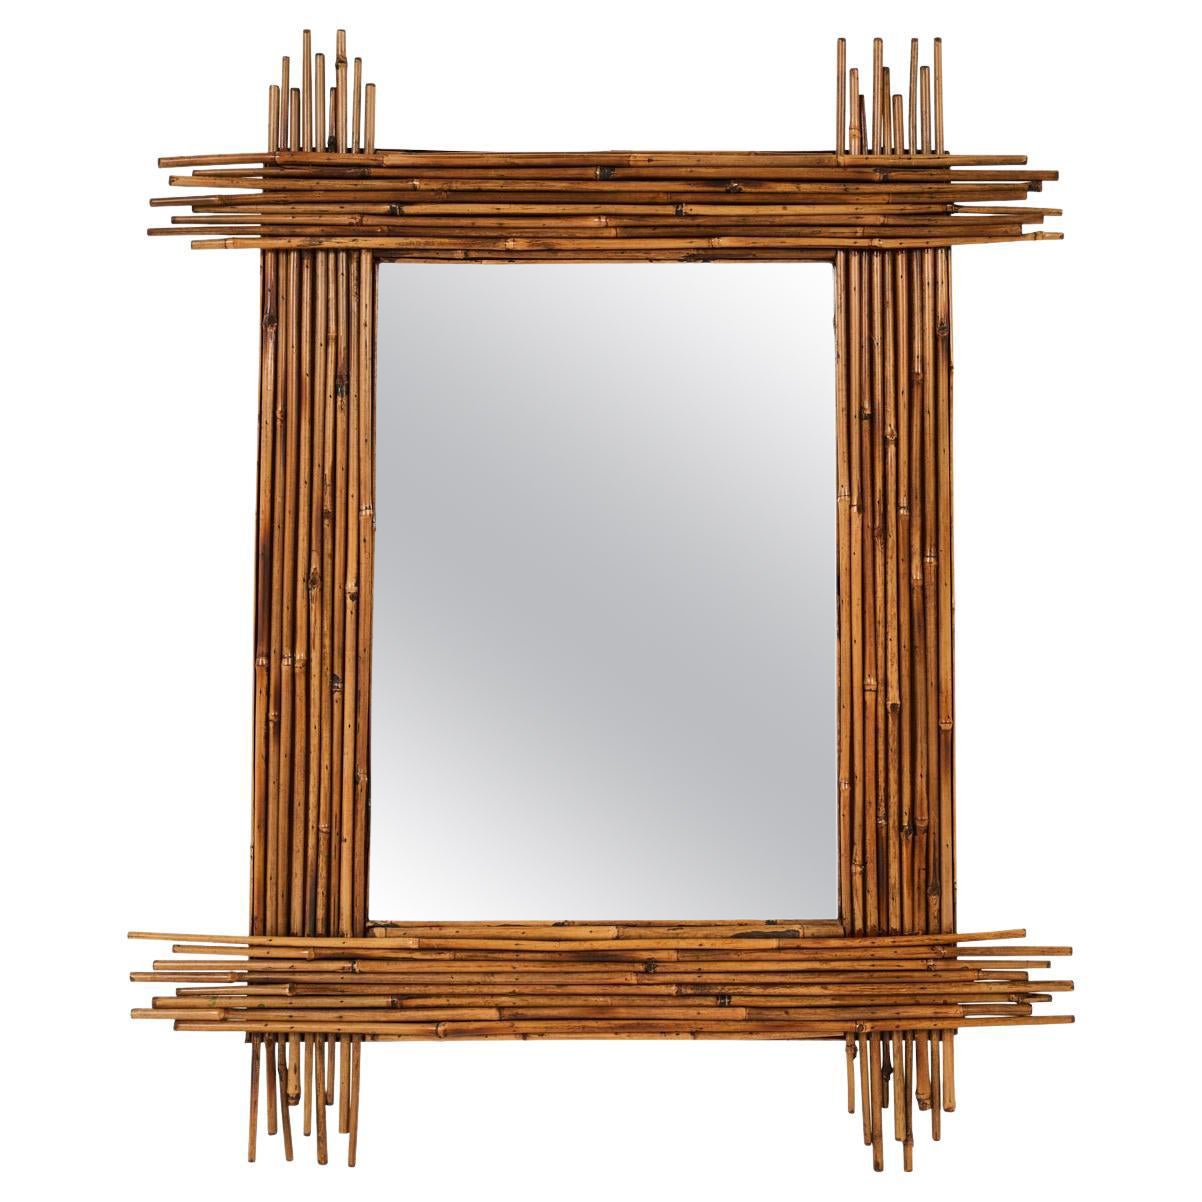 1960s Vintage Bamboo Mirror, South of France